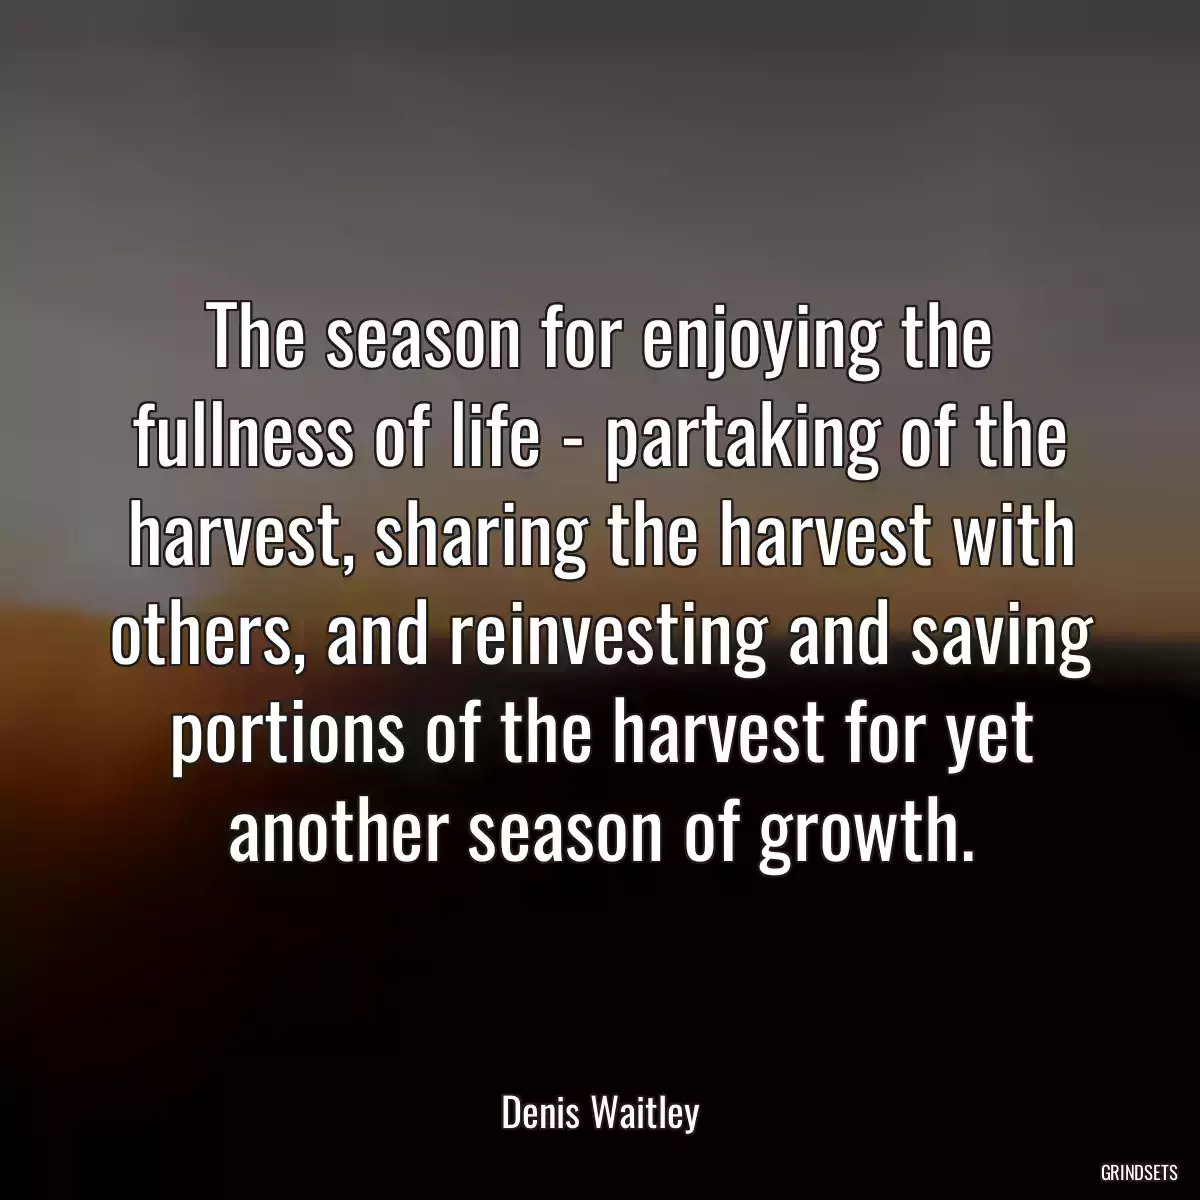 The season for enjoying the fullness of life - partaking of the harvest, sharing the harvest with others, and reinvesting and saving portions of the harvest for yet another season of growth.